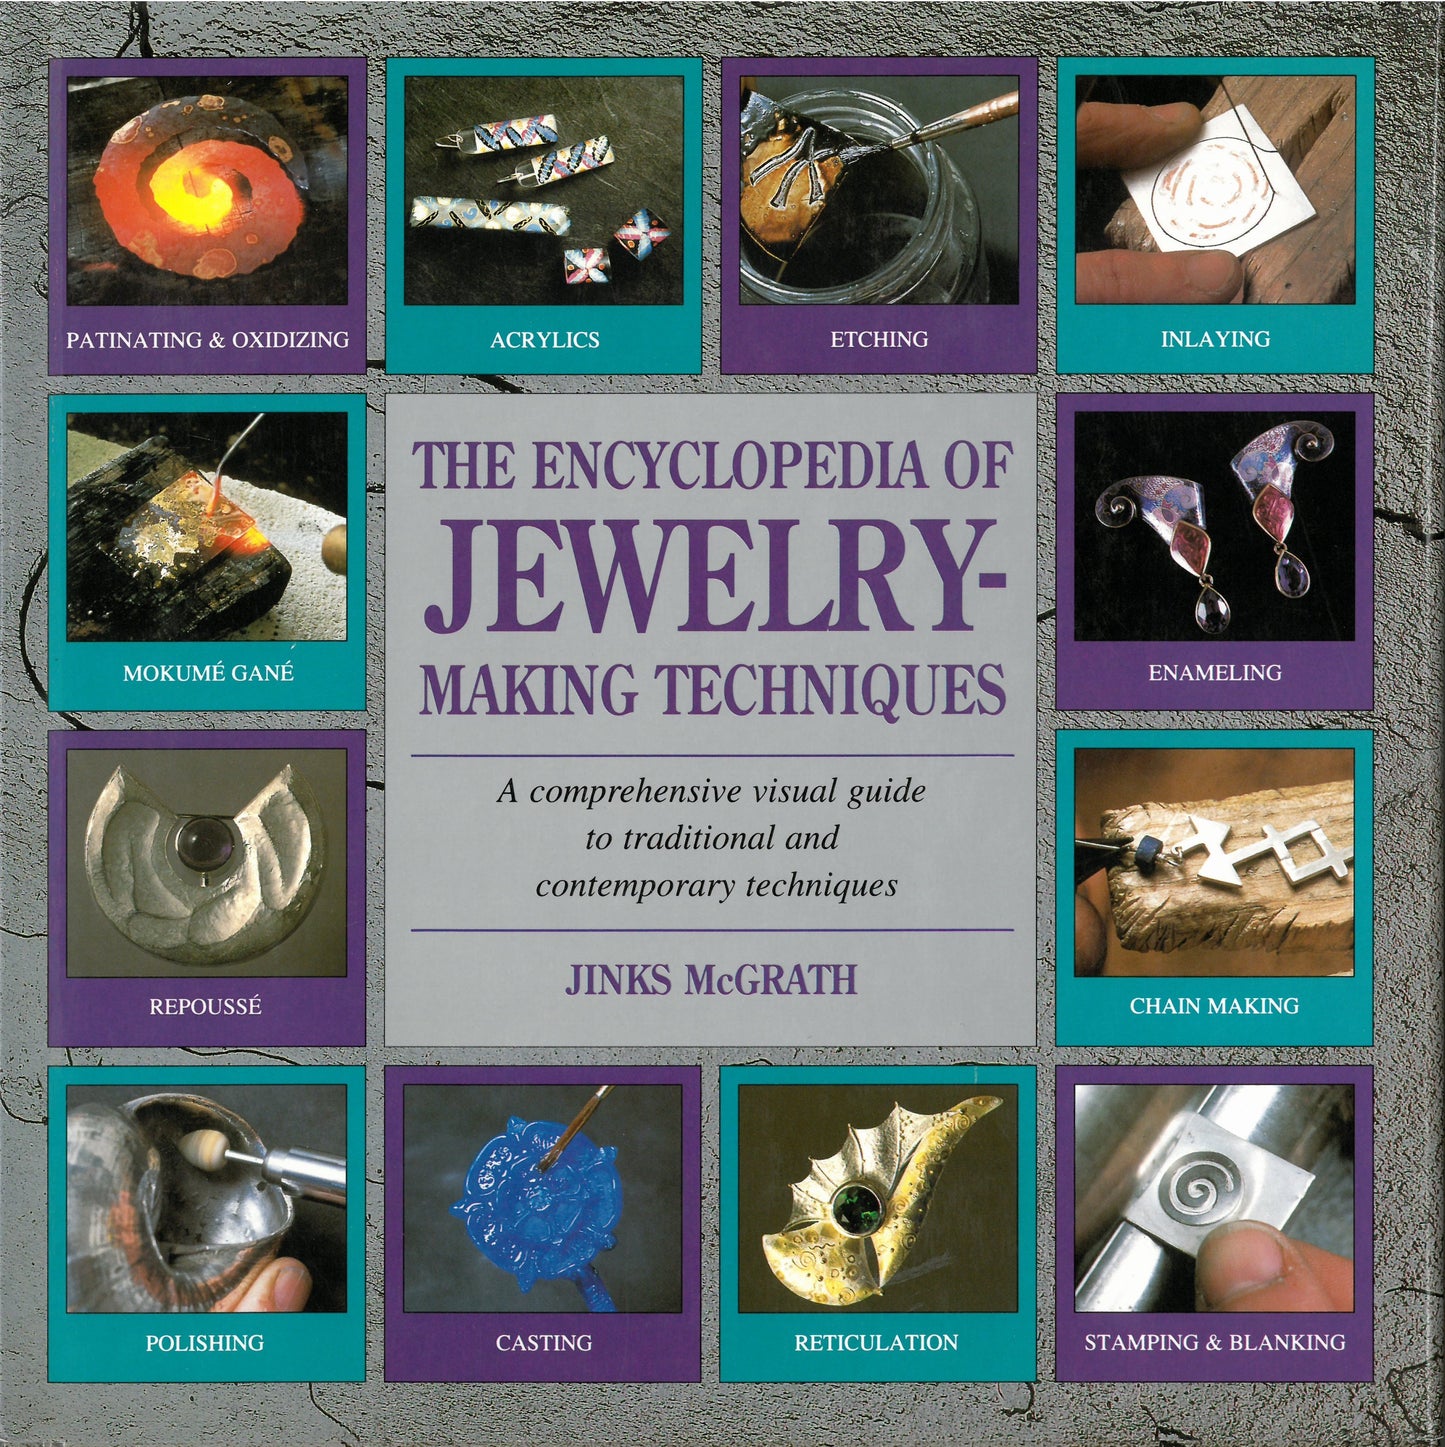 The Encyclopedia of Jewelry-Making Techniques by Jinks McGrath